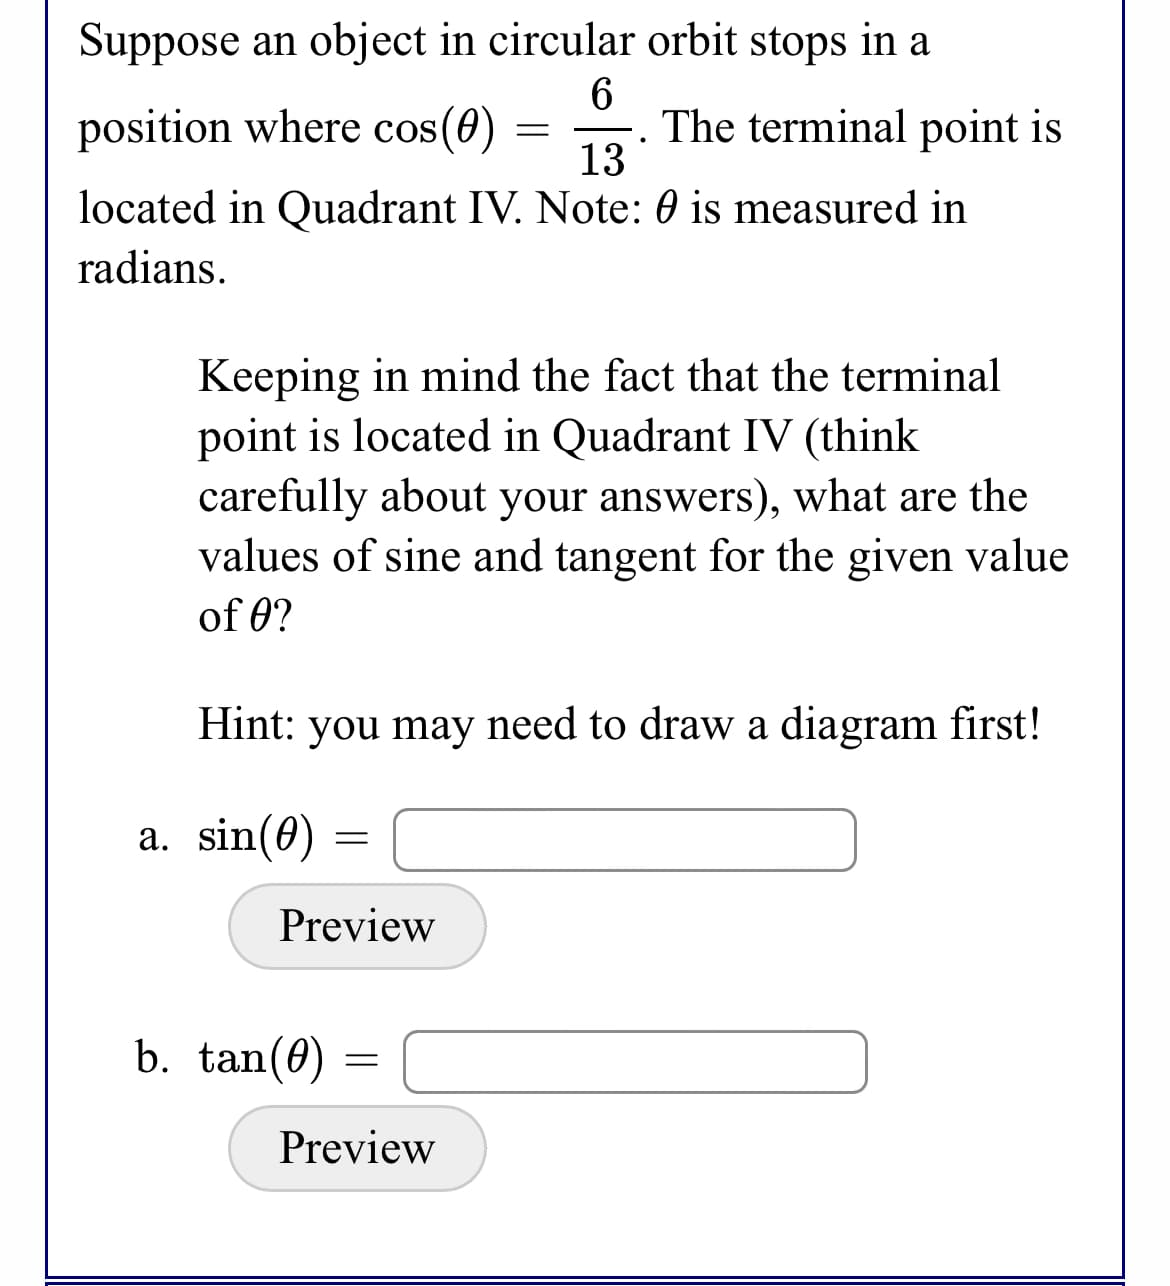 Suppose an object in circular orbit stops in a
position where cos(0)
The terminal point is
13
located in Quadrant IV. Note: 0 is measured in
radians.
Keeping in mind the fact that the terminal
point is located in Quadrant IV (think
carefully about your answers), what are the
values of sine and tangent for the given value
of 0?
Hint: you may need to draw a diagram first!
a. sin(0) =
Preview
b. tan(0)
Preview
